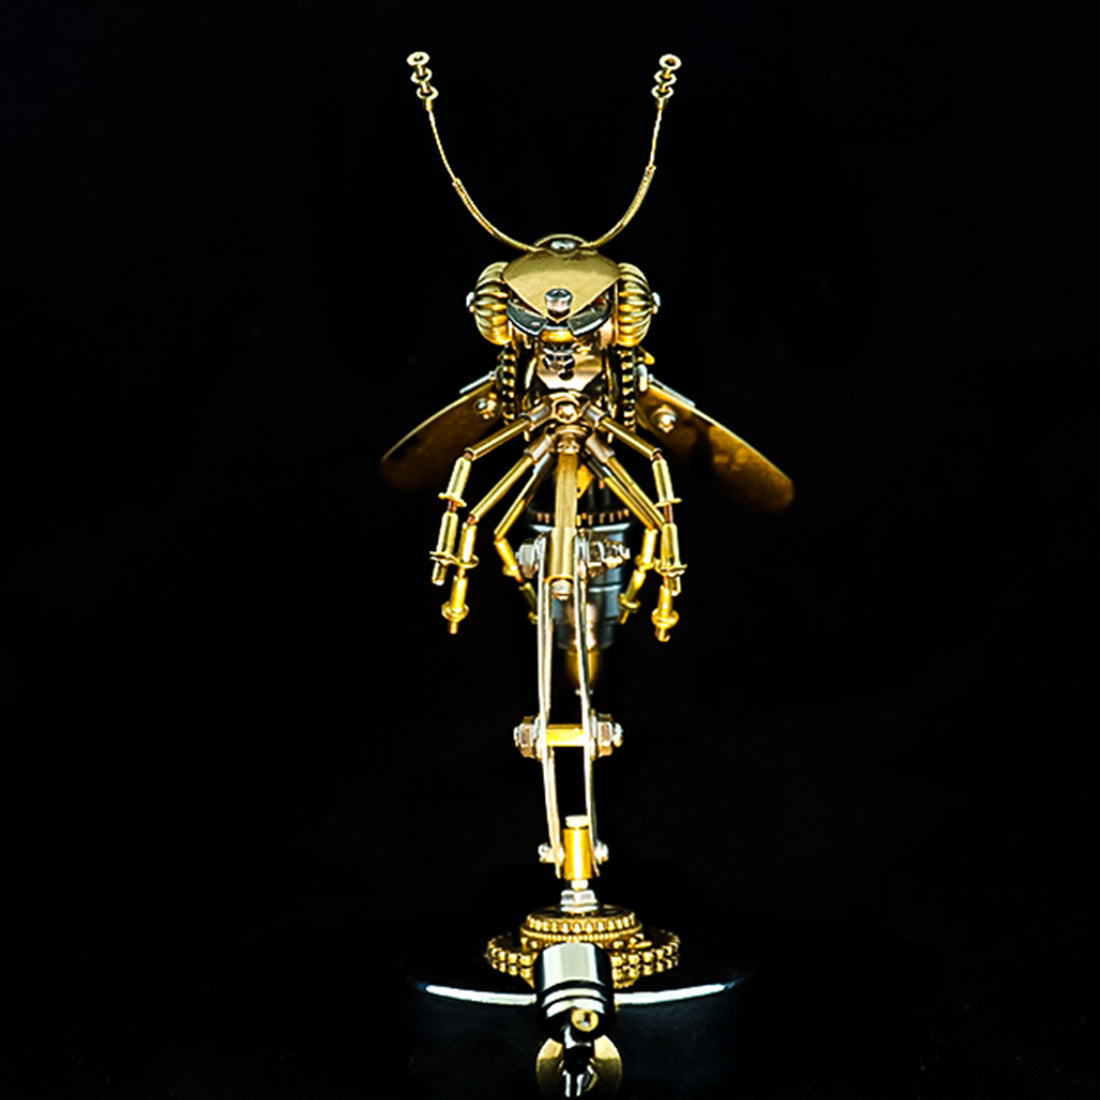 Steampunk Metal Brass Wasp Bug Model  Insect with Light Handmade Assembly Crafts